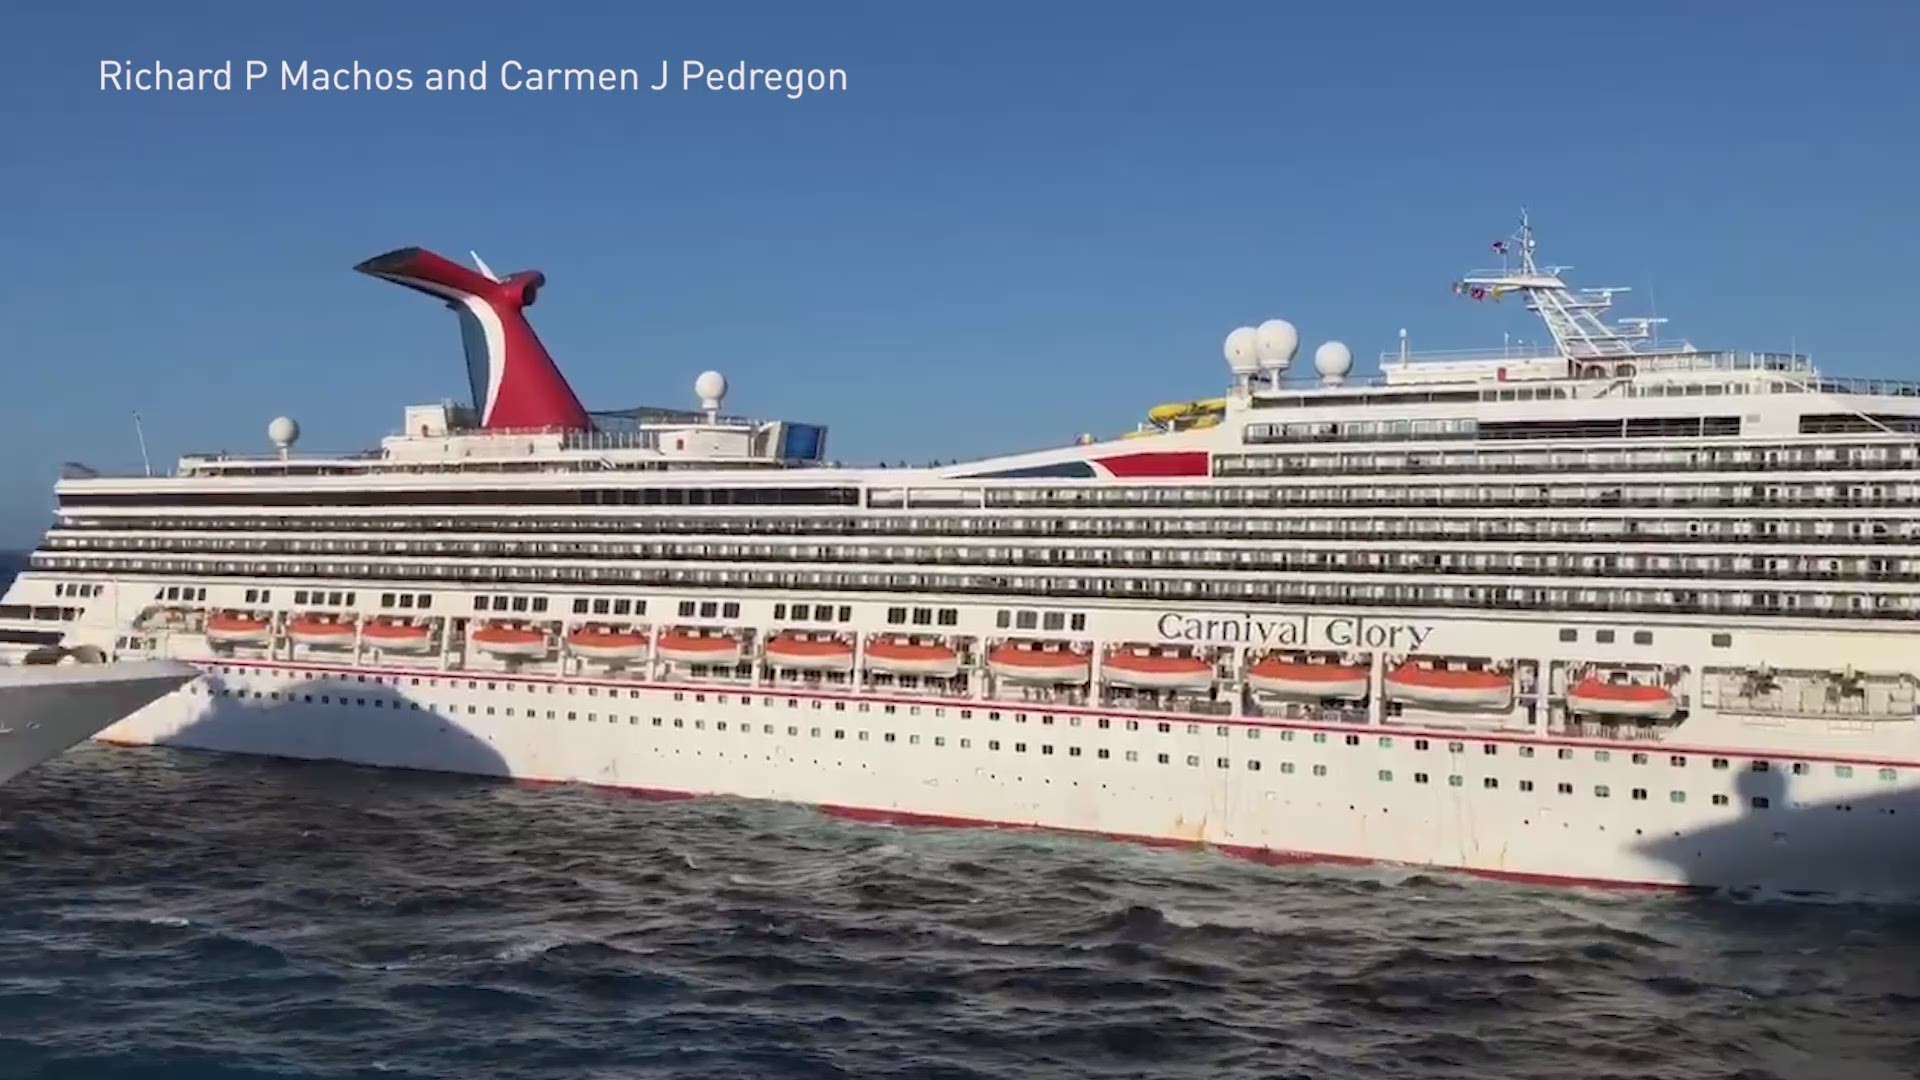 Carnival Cruise Line is assessing damage to two of its ships that collided Friday morning in Cozumel, Mexico. (Video: Richard P Machos and Carmen J Pedregon)